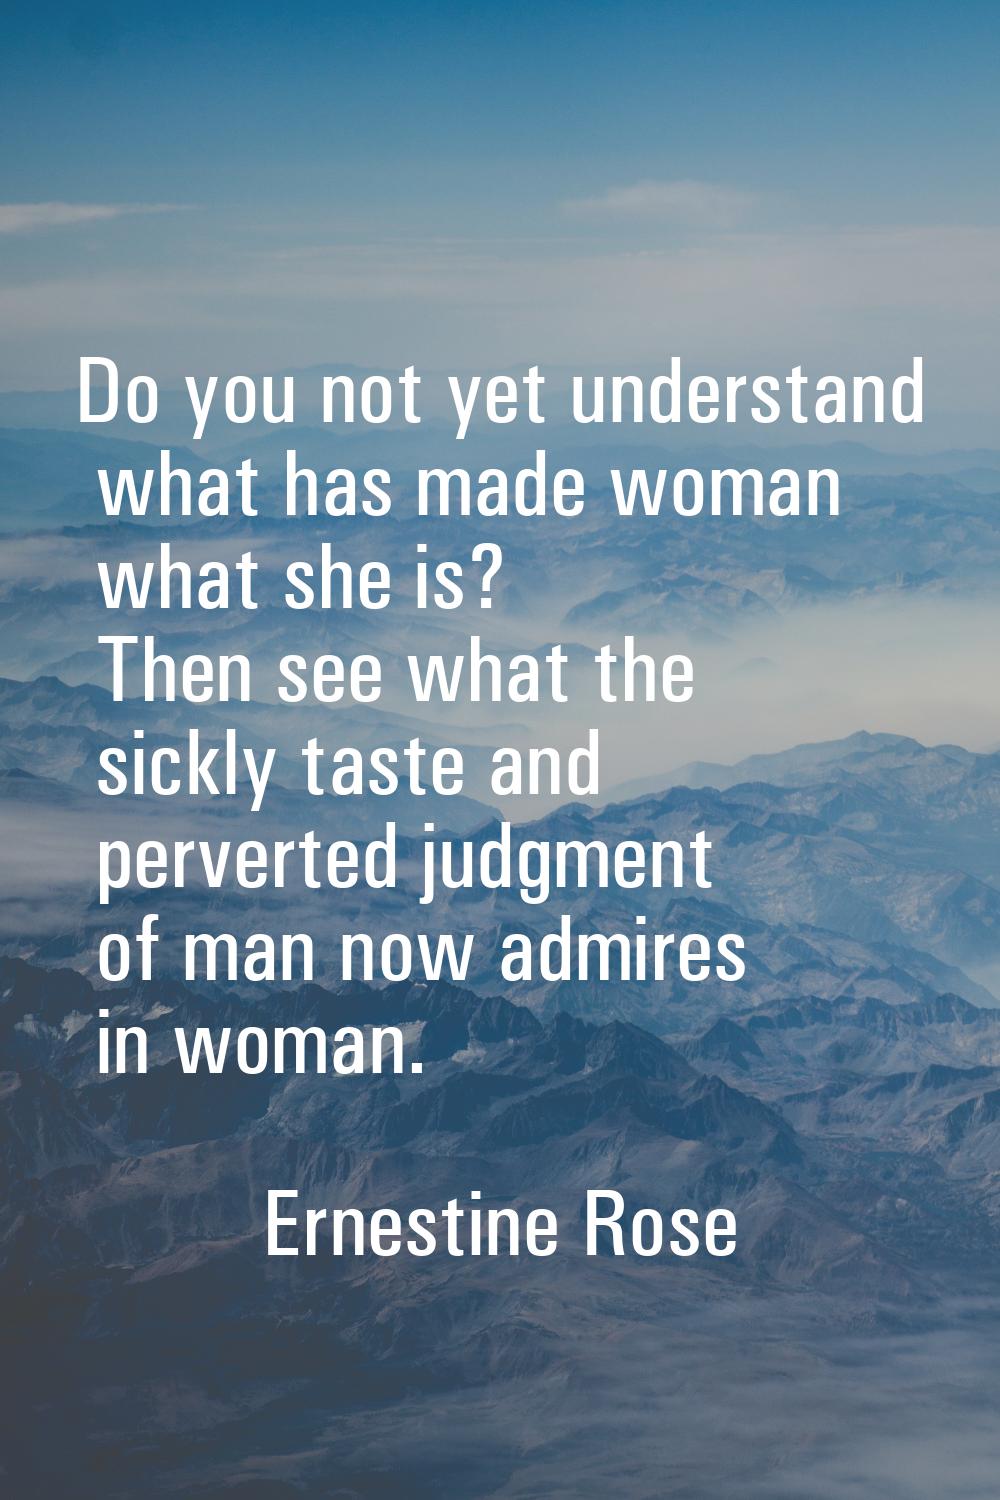 Do you not yet understand what has made woman what she is? Then see what the sickly taste and perve